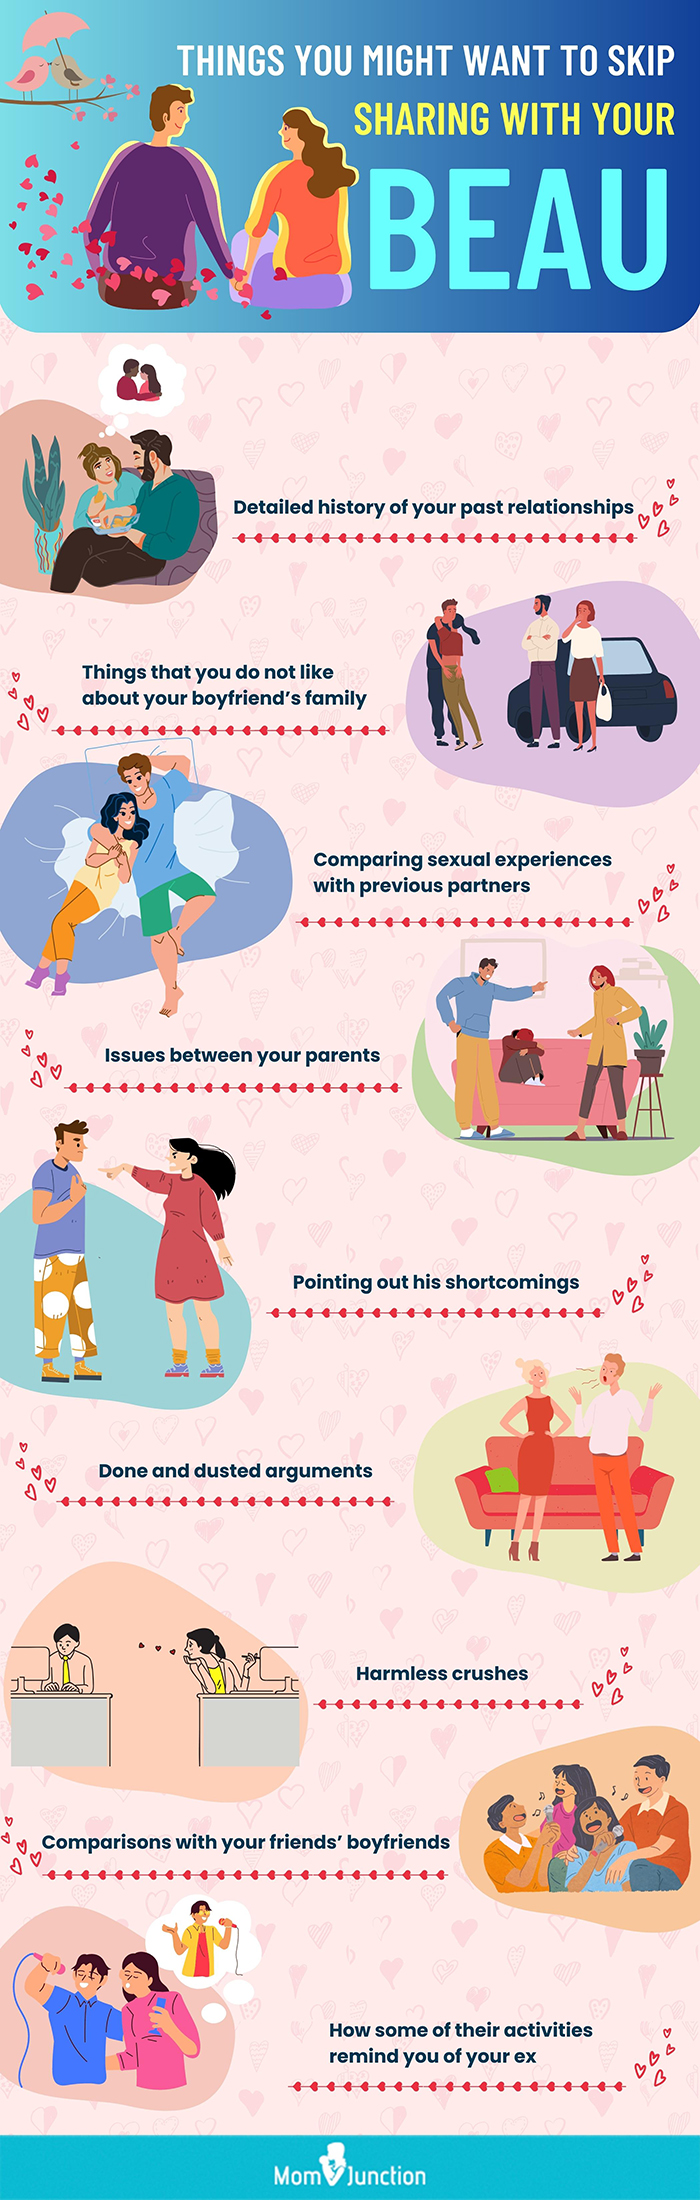 things you might want to skip sharing with your beau (infographic)